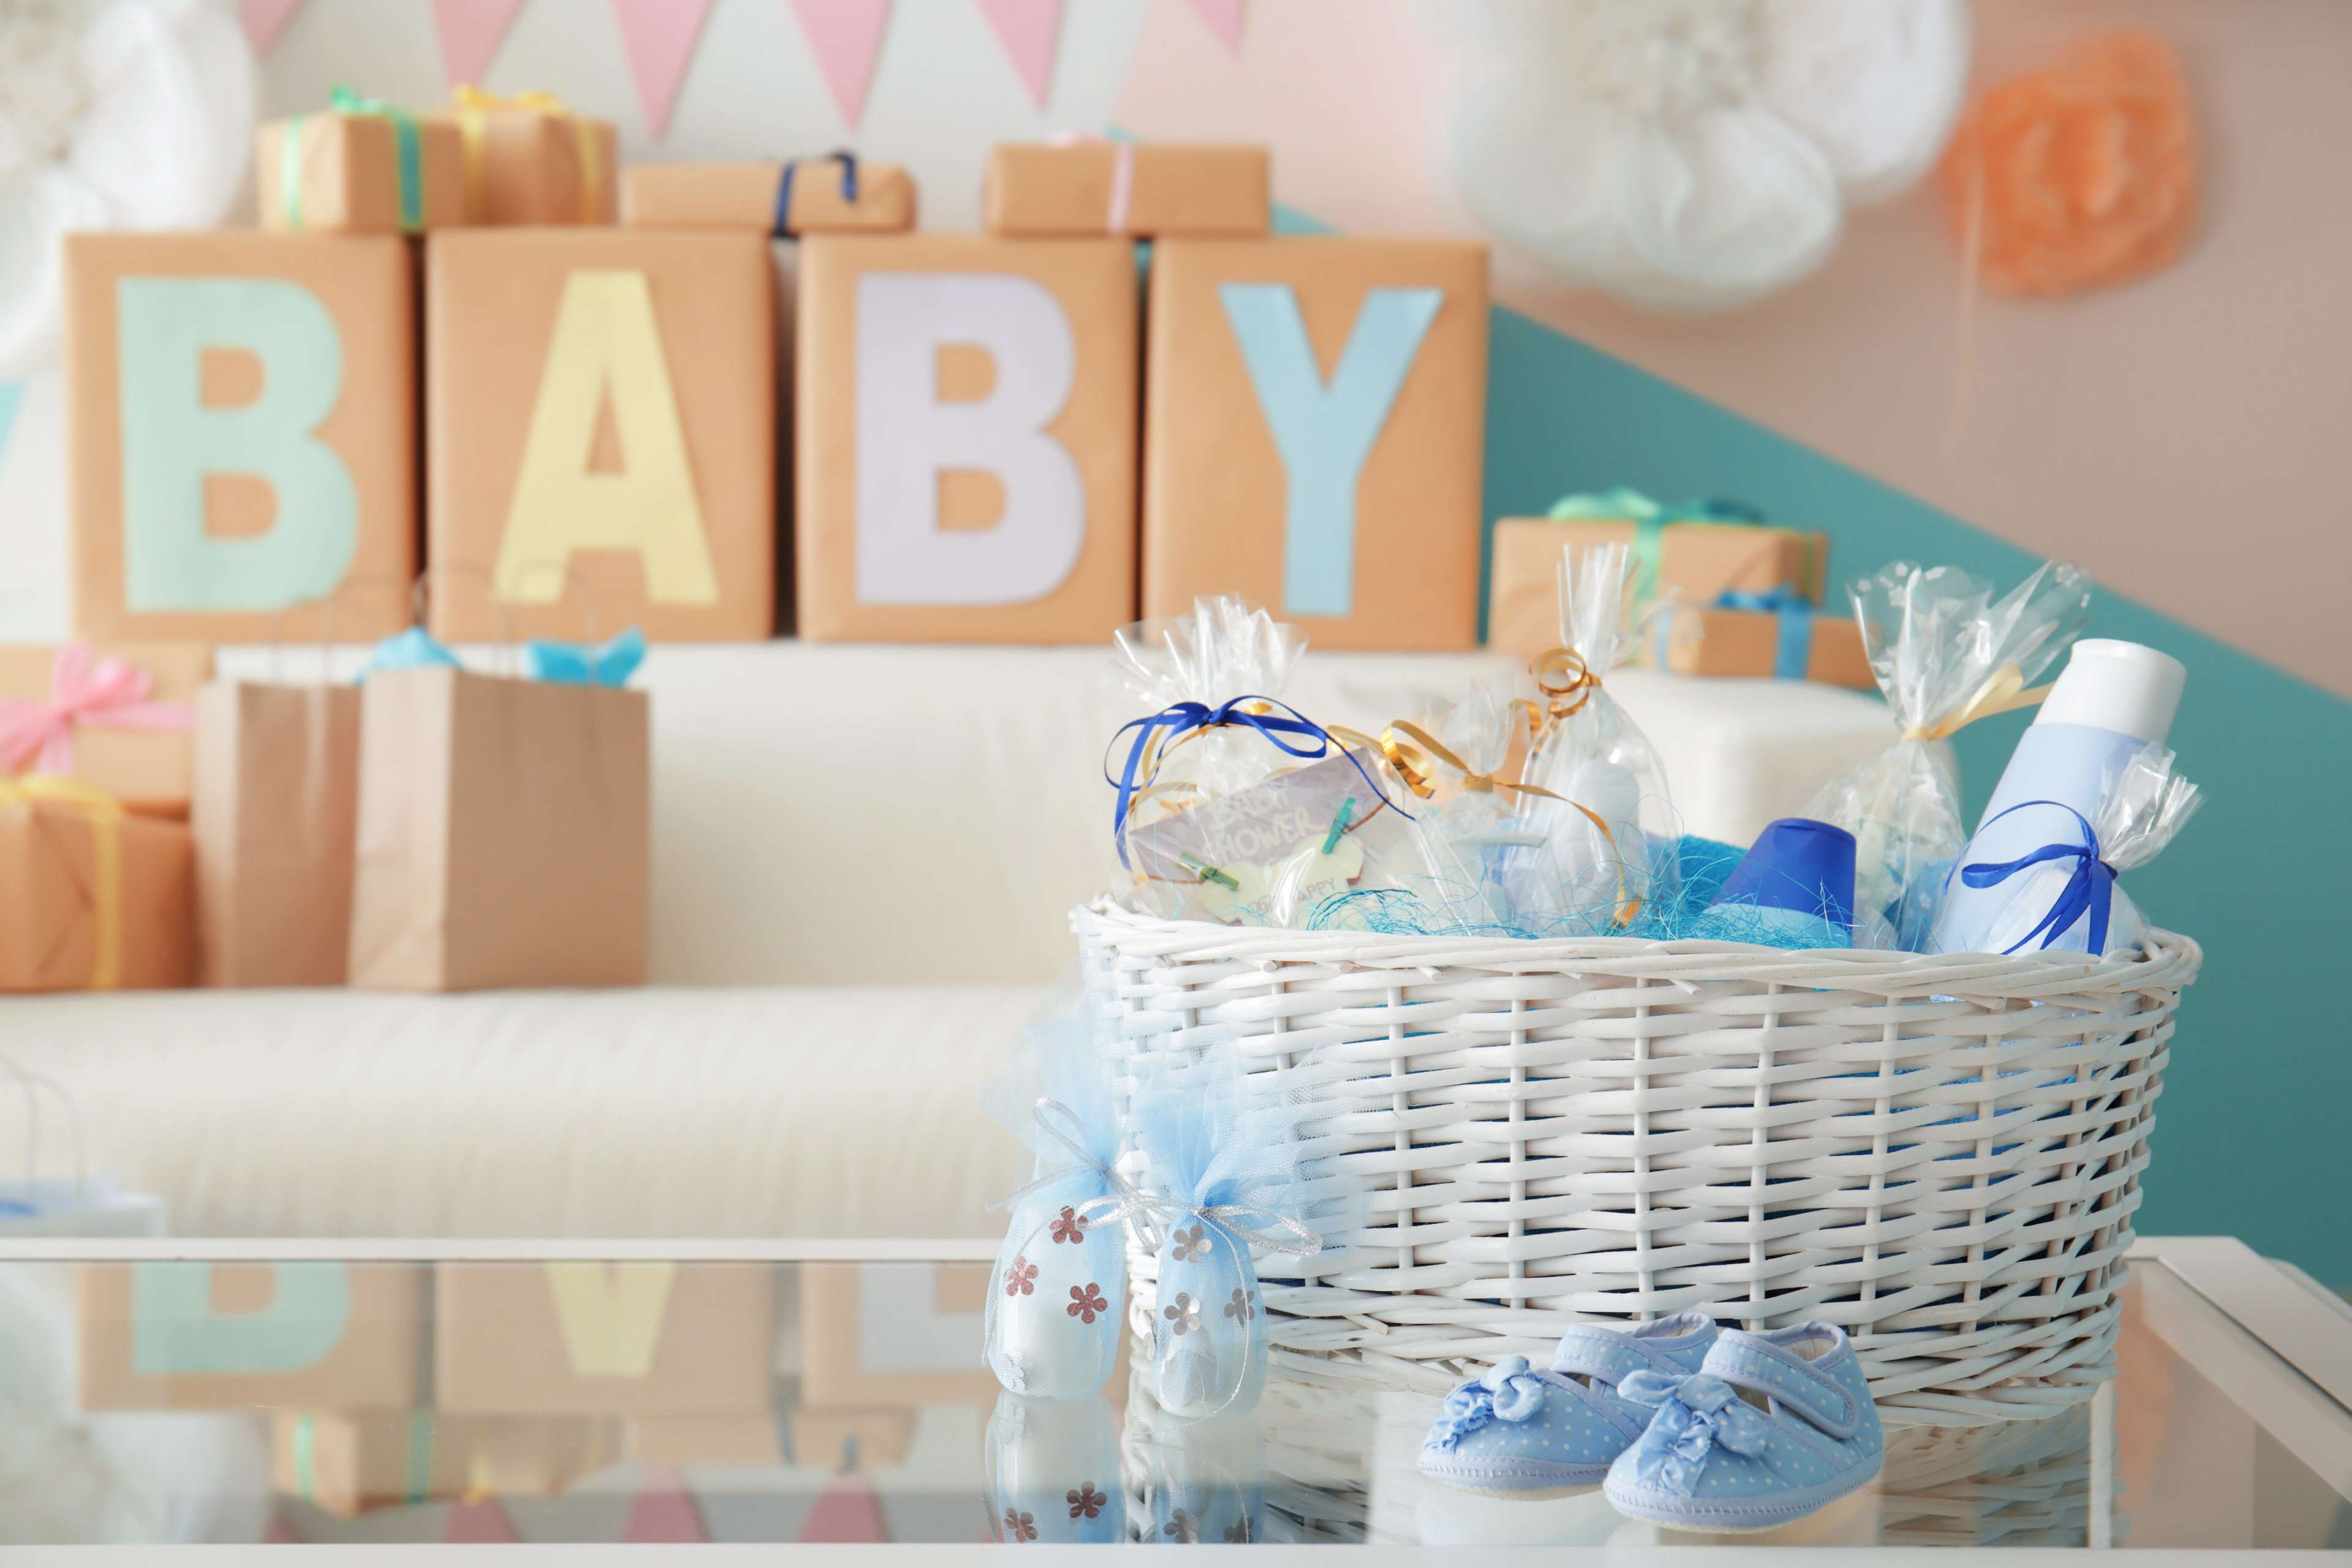 62017bdaf670eafa739b0f0c_Wicker%20basket%20with%20gifts%20for%20baby%20shower%20party%20on%20table%20indoors.jpeg